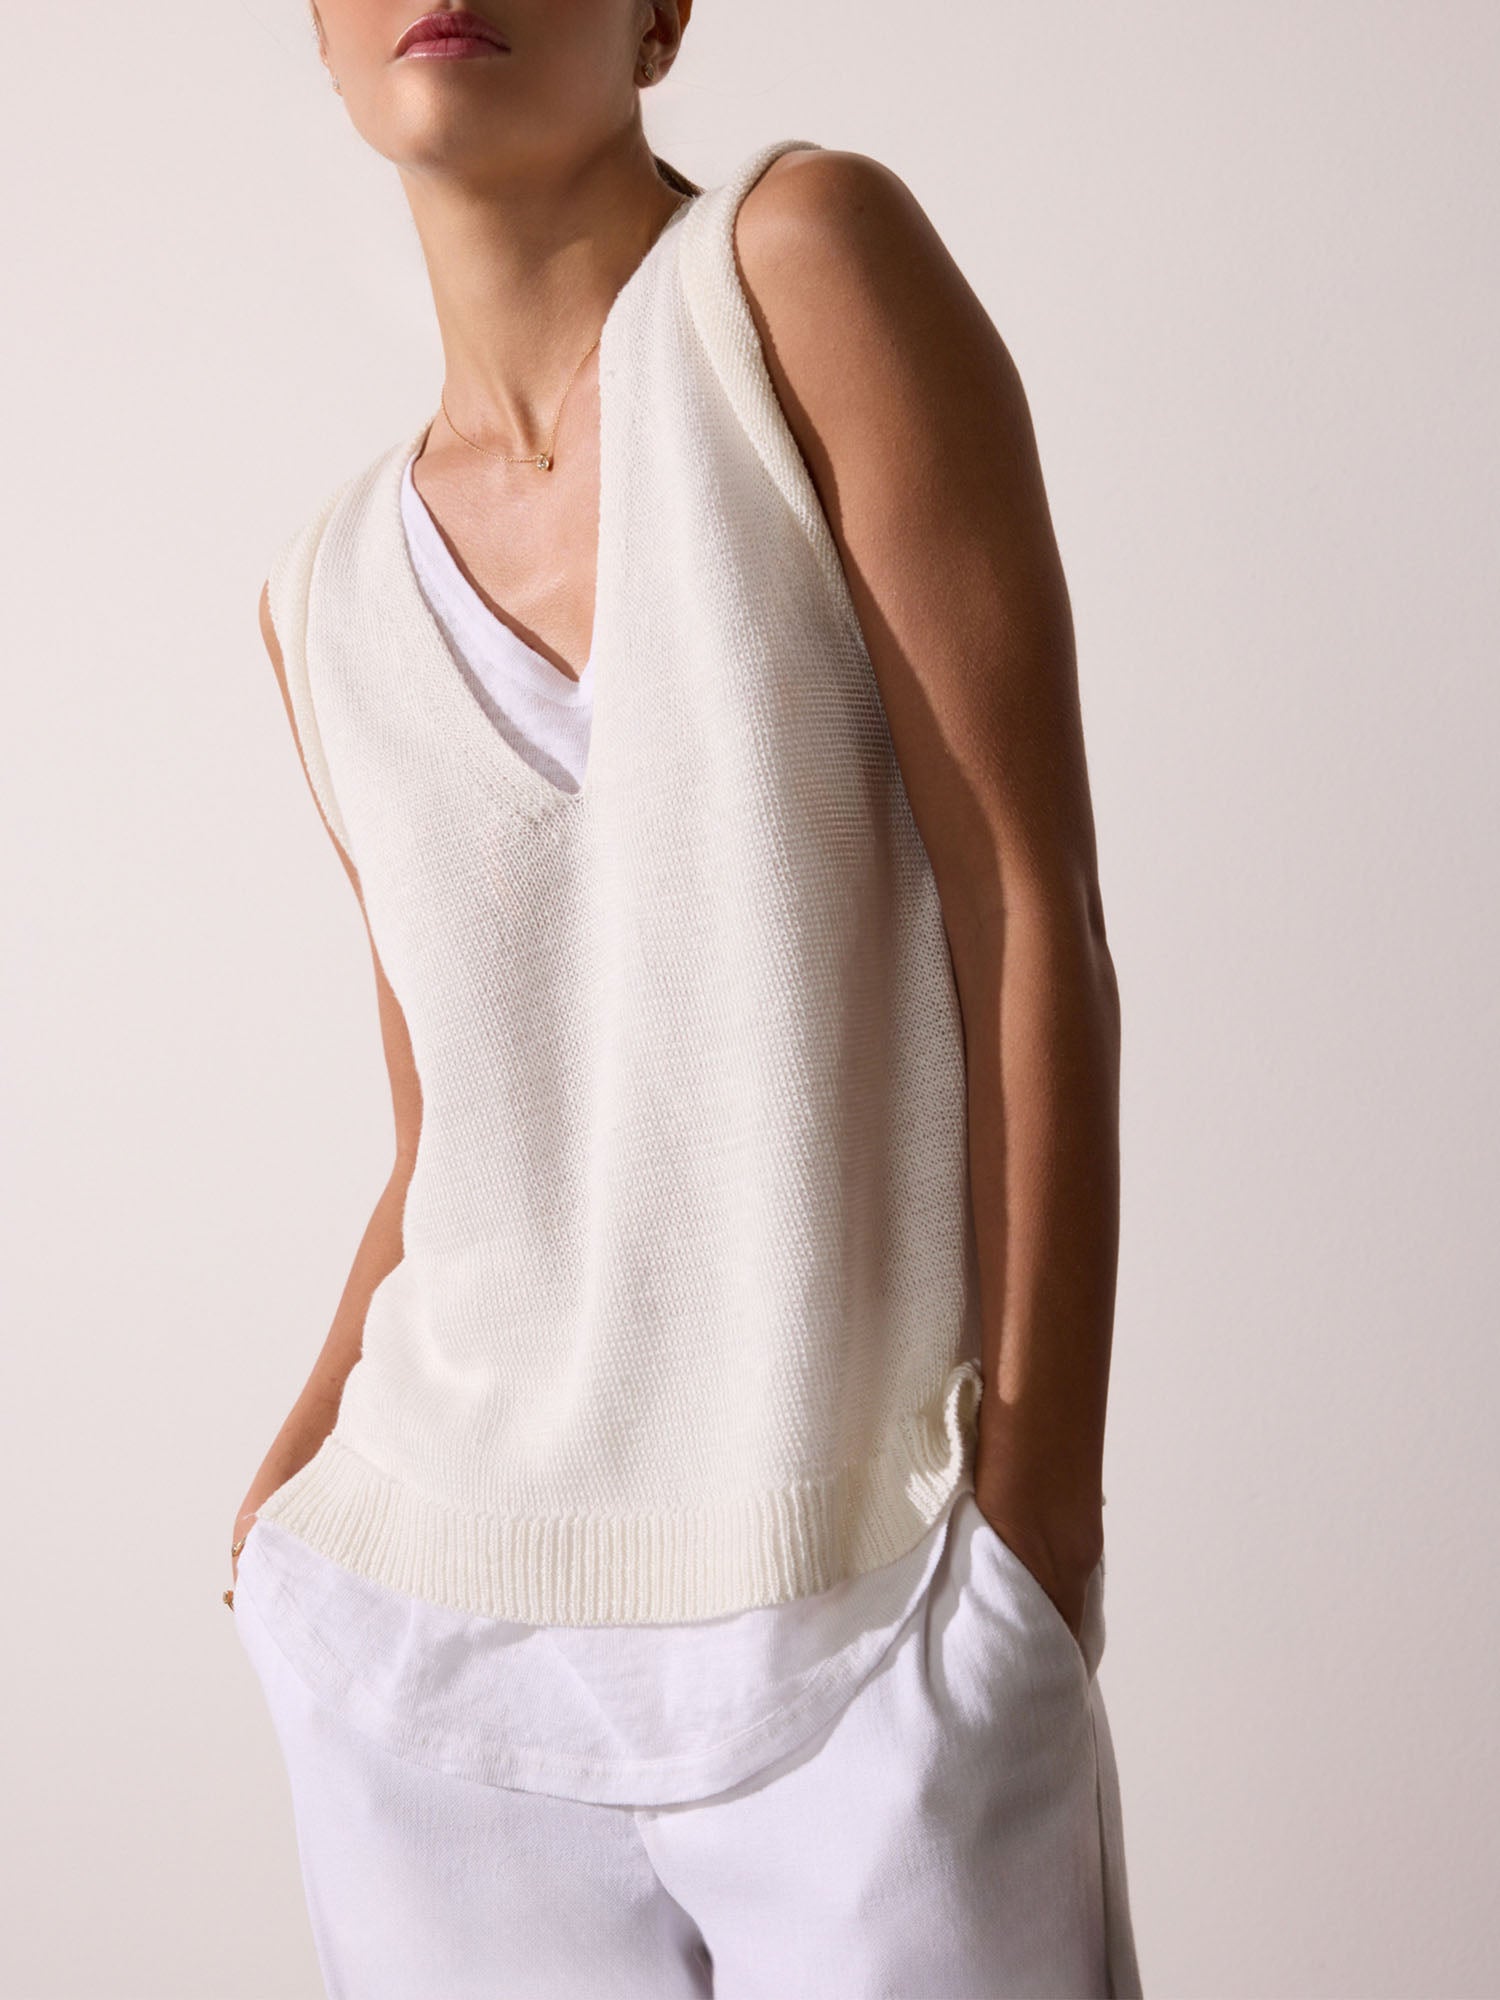 Morrow white layered V-neck tank top front view 